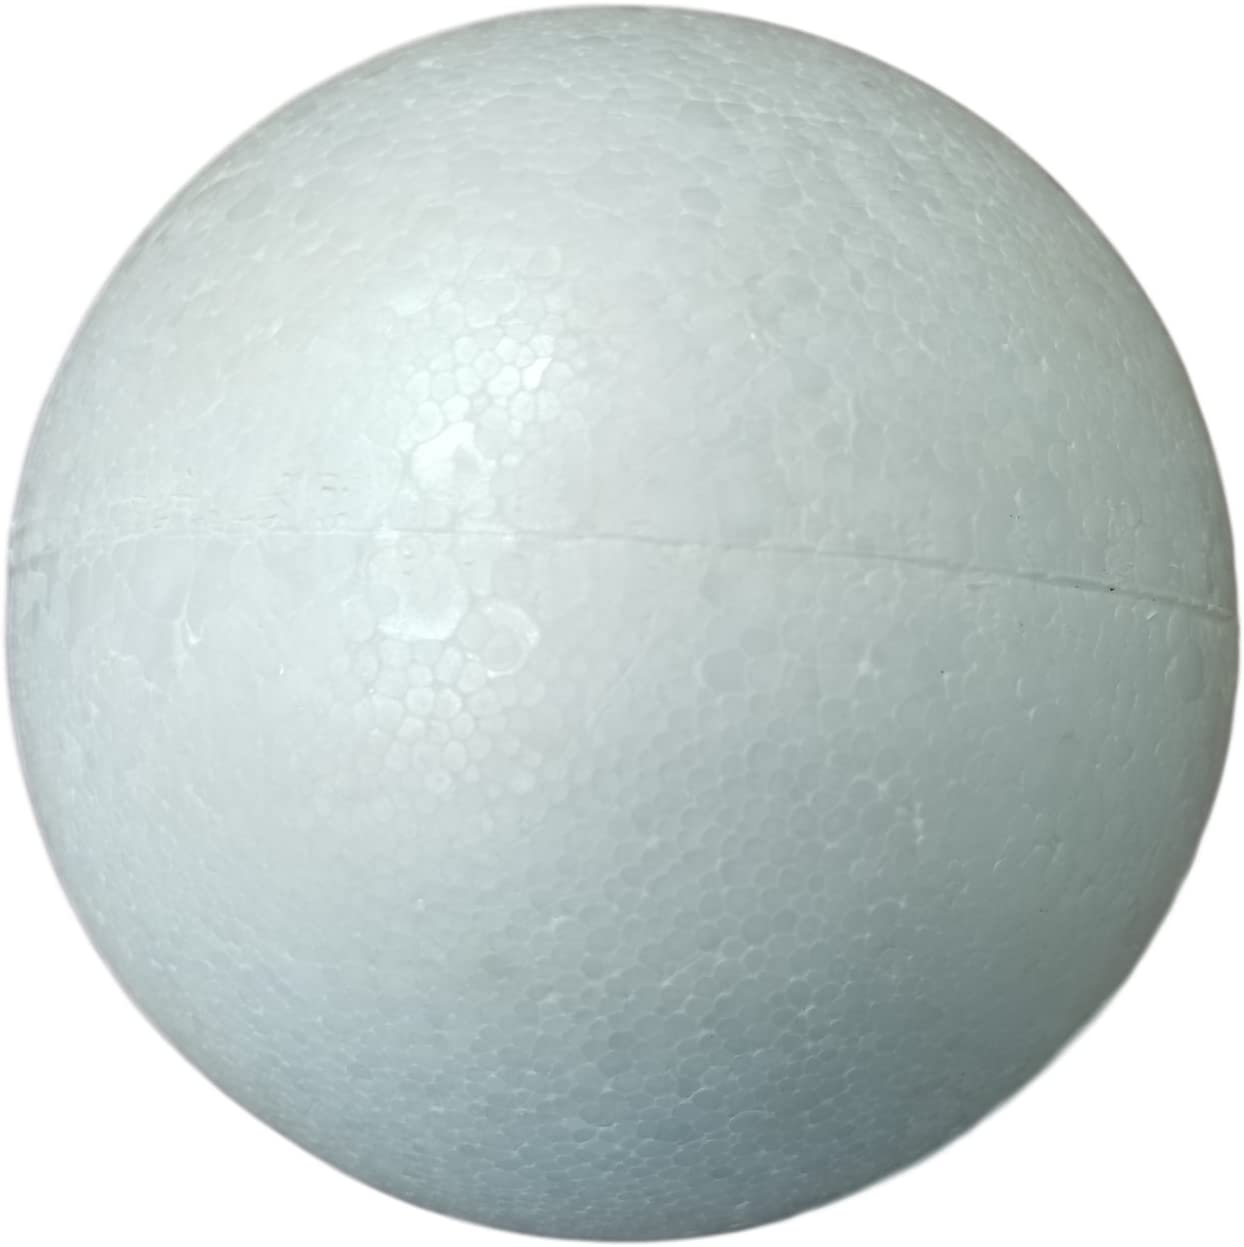 MT Products 1.5 inch Round White Polystyrene Foam Balls for Crafts - Pack of 50